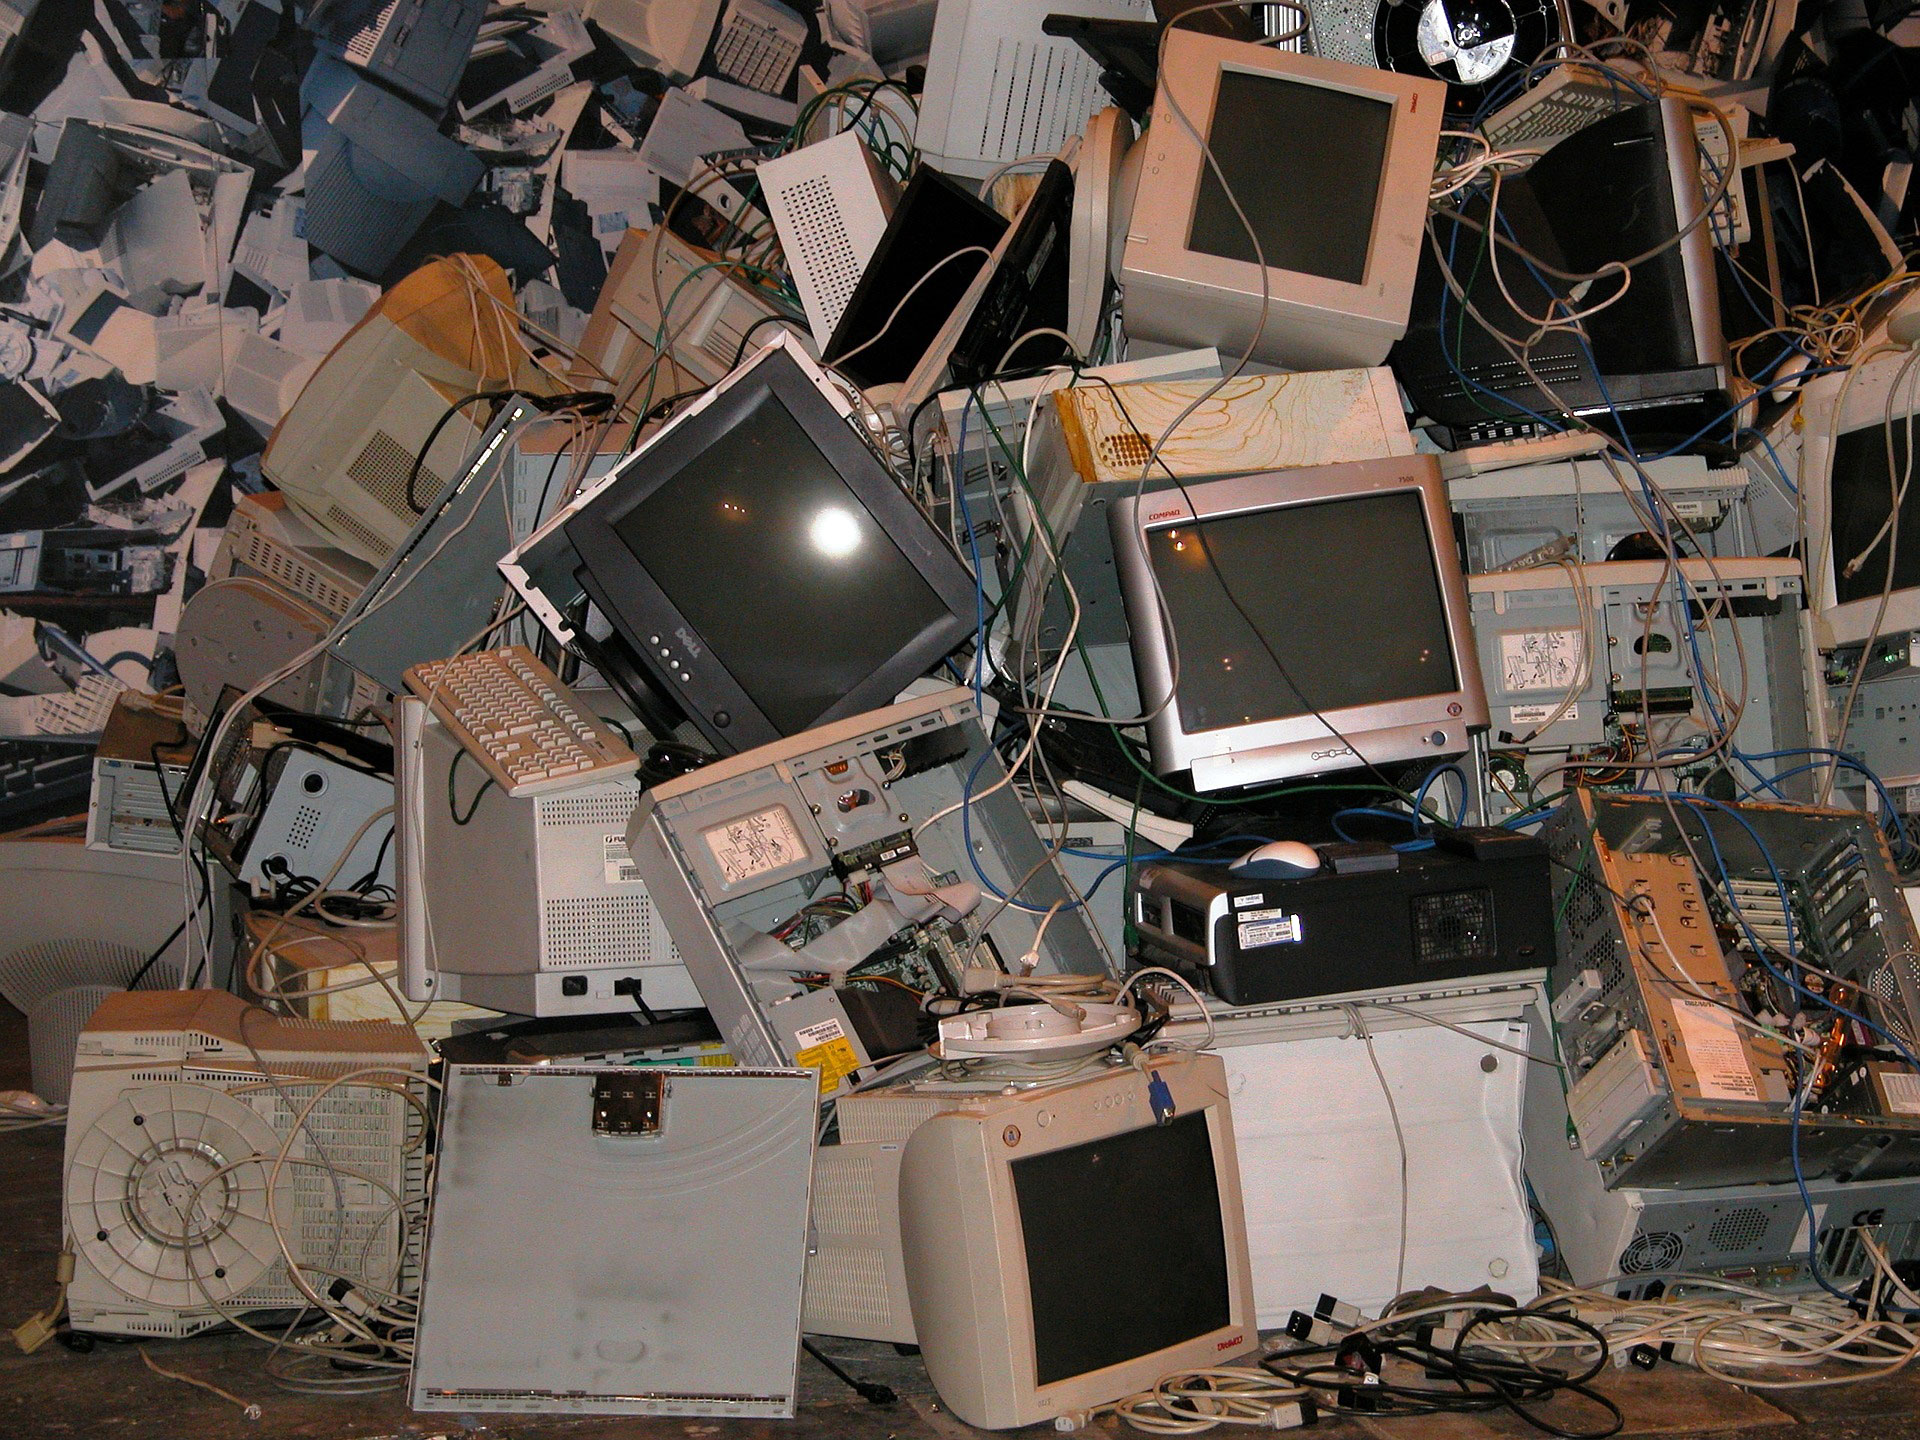 What Happens To Electronic Waste